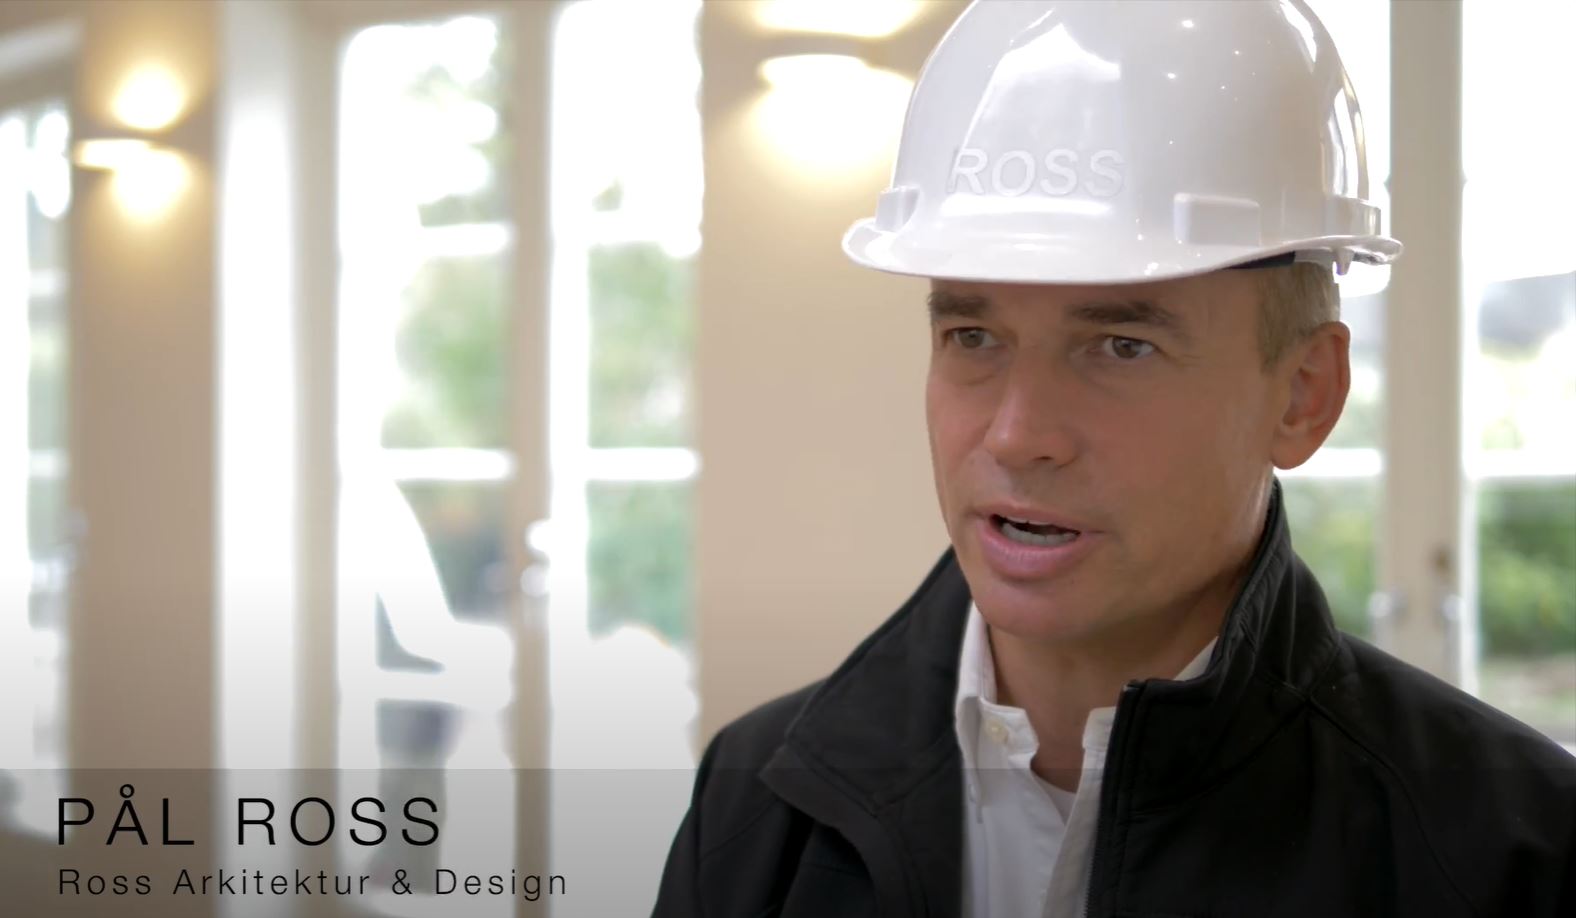 Architect Pål Ross with a construction helmet on his head